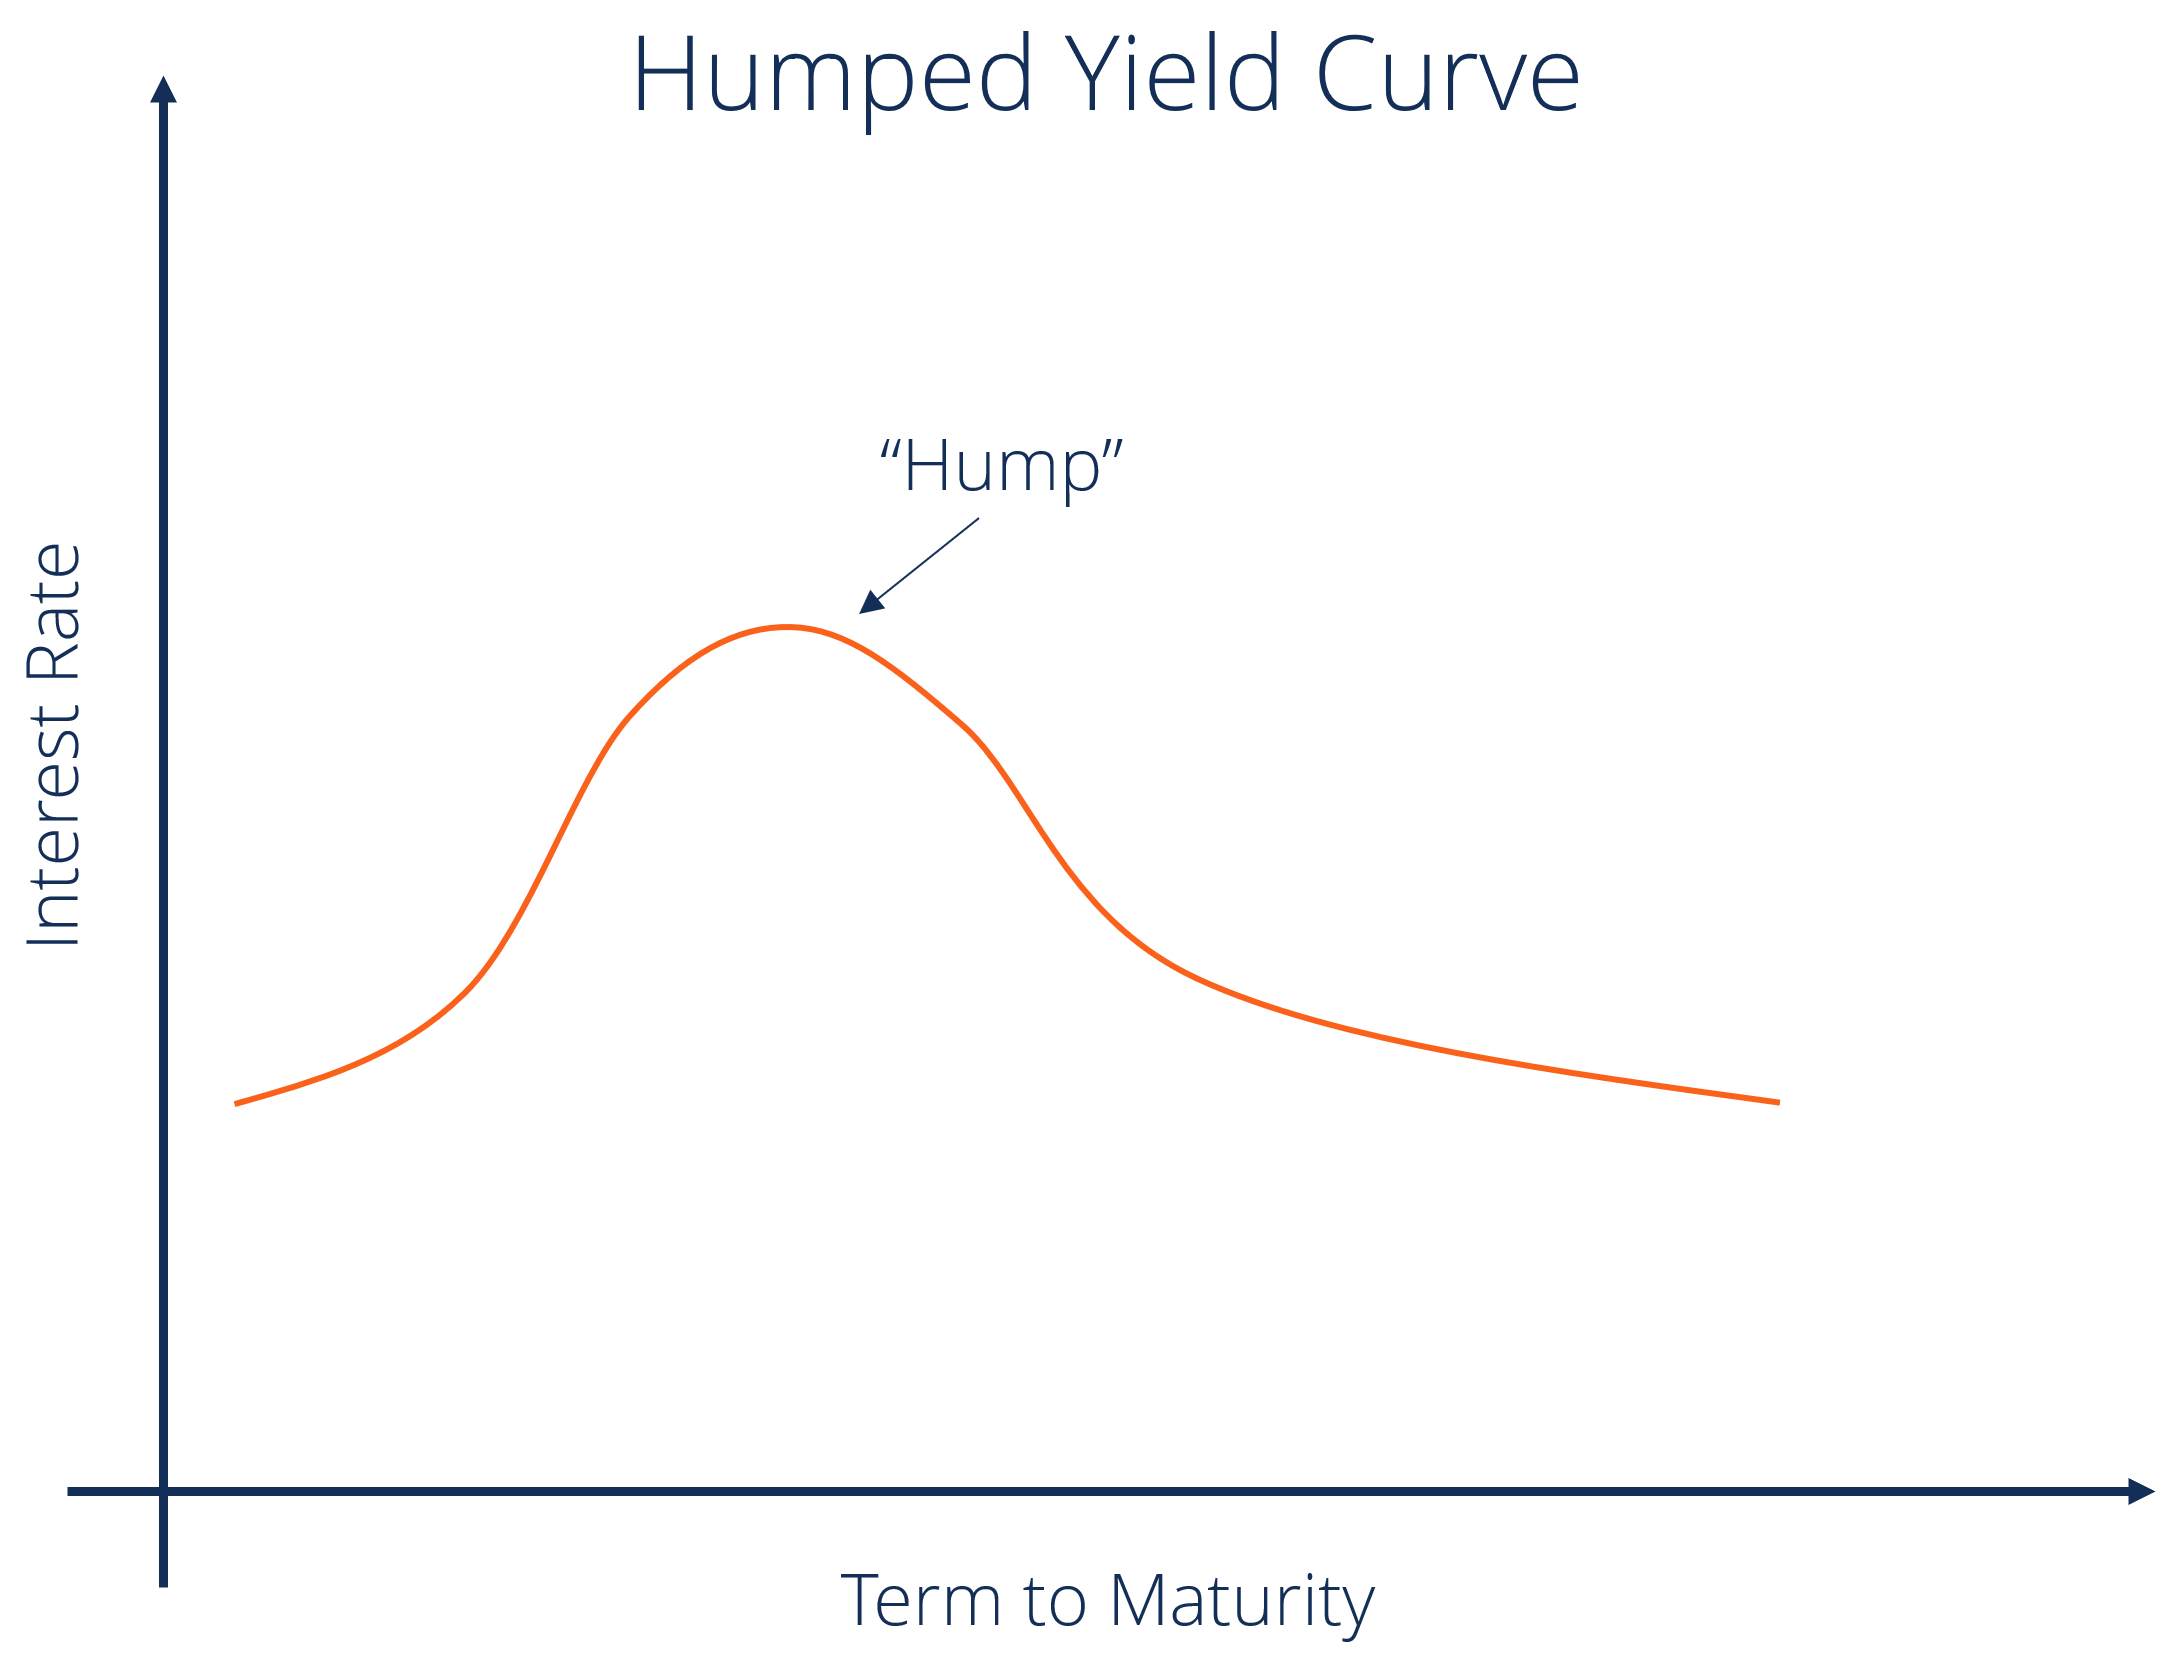 Humped Yield Curve